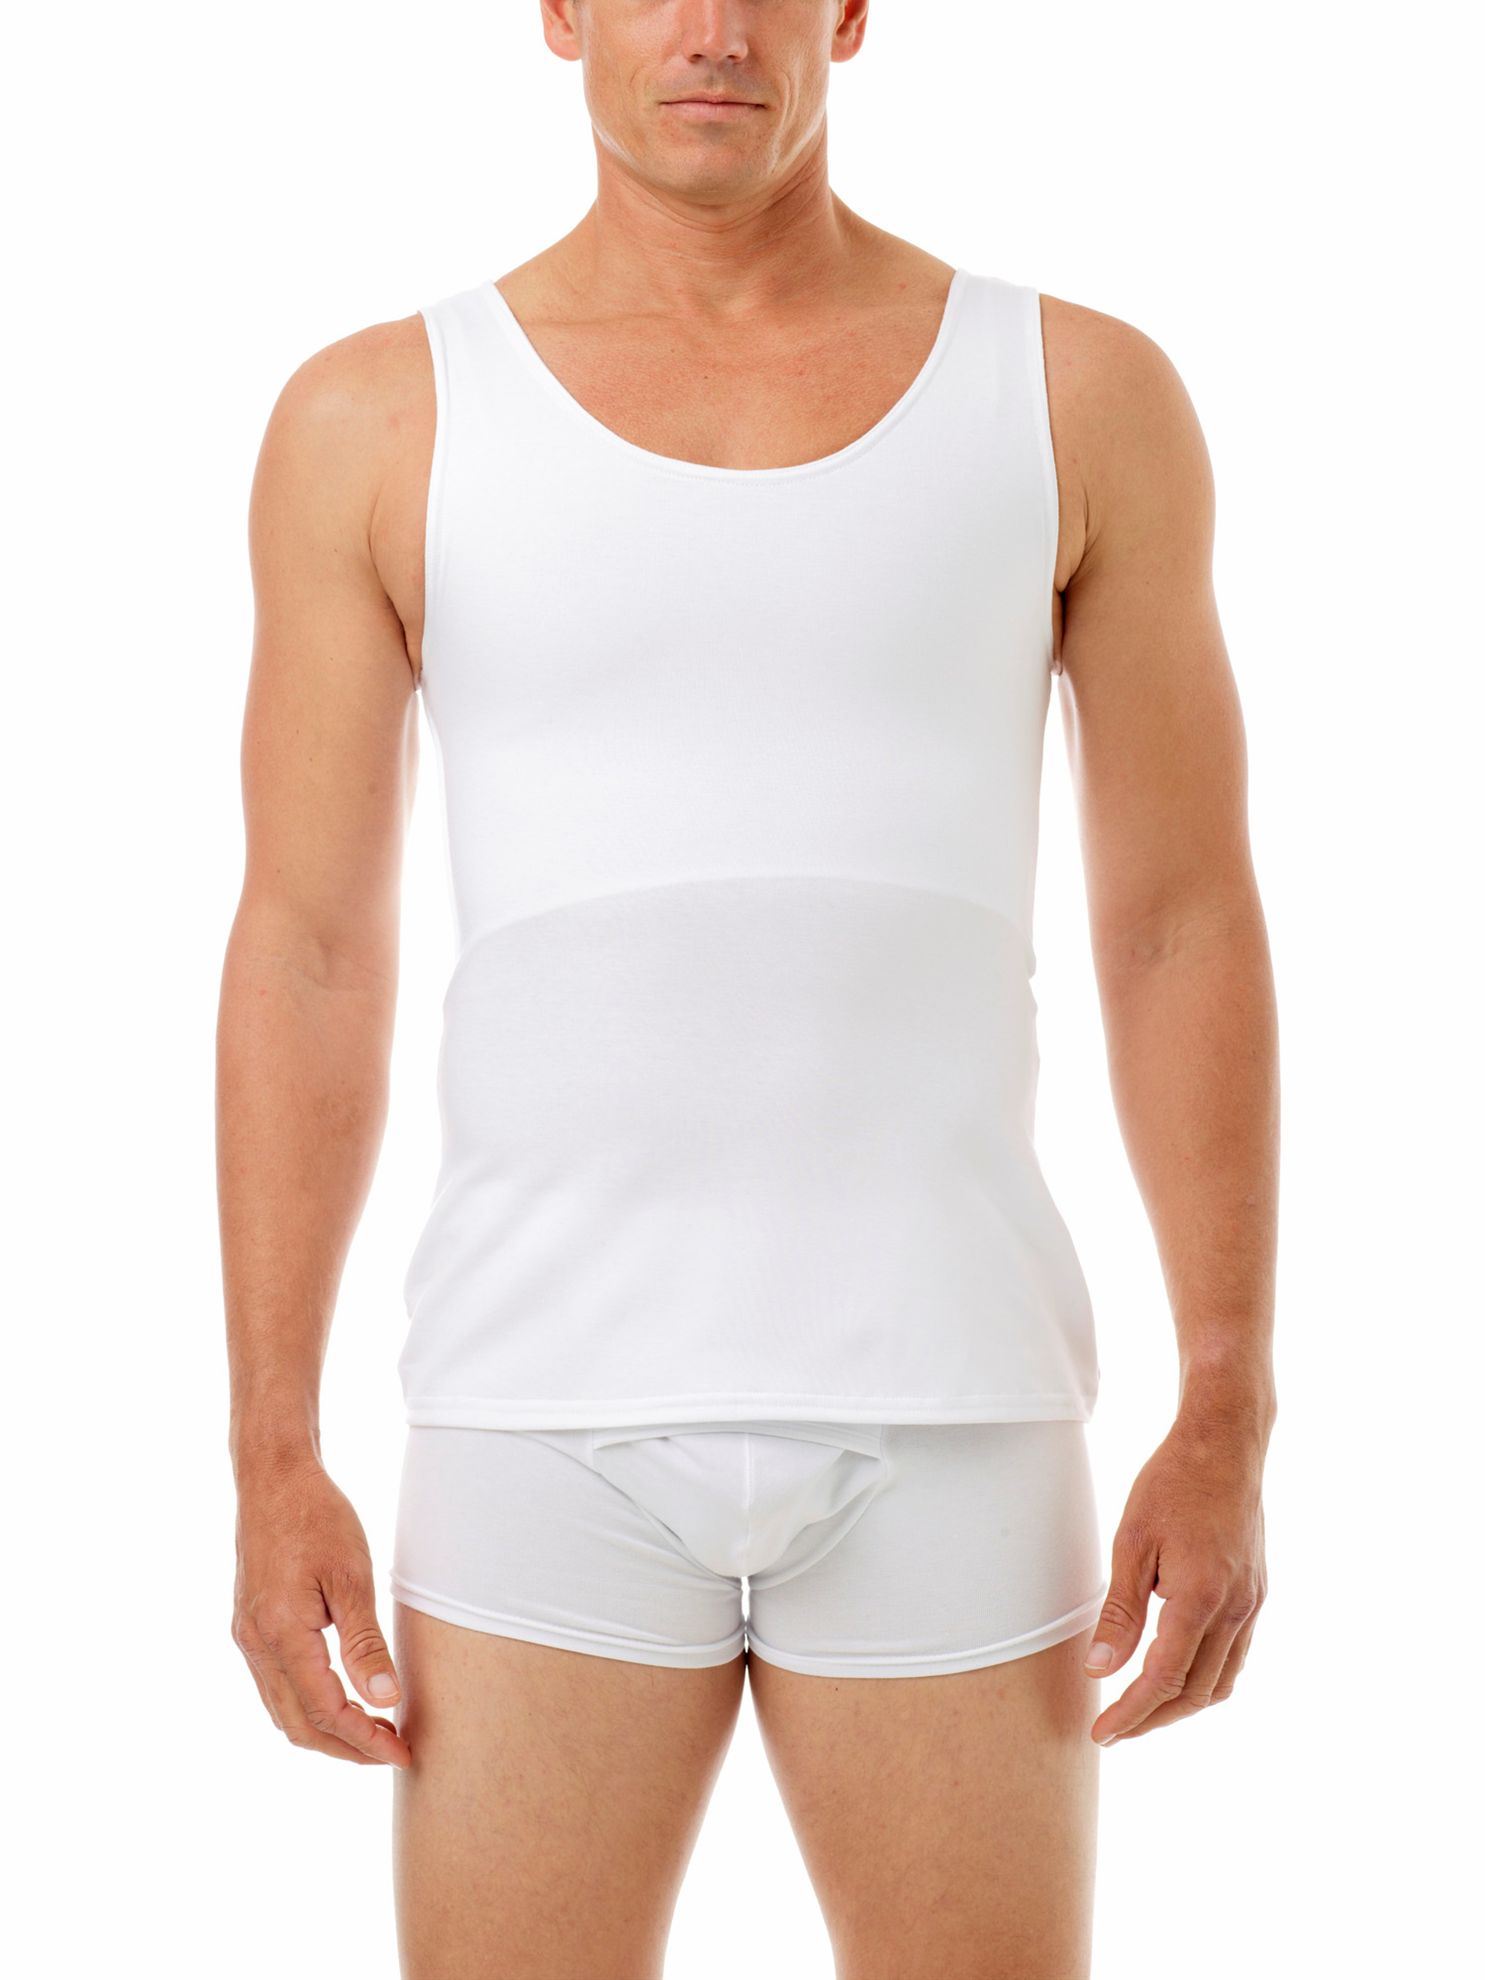 Underworks Extreme Compression Tri-top Chest Binder for FTM and